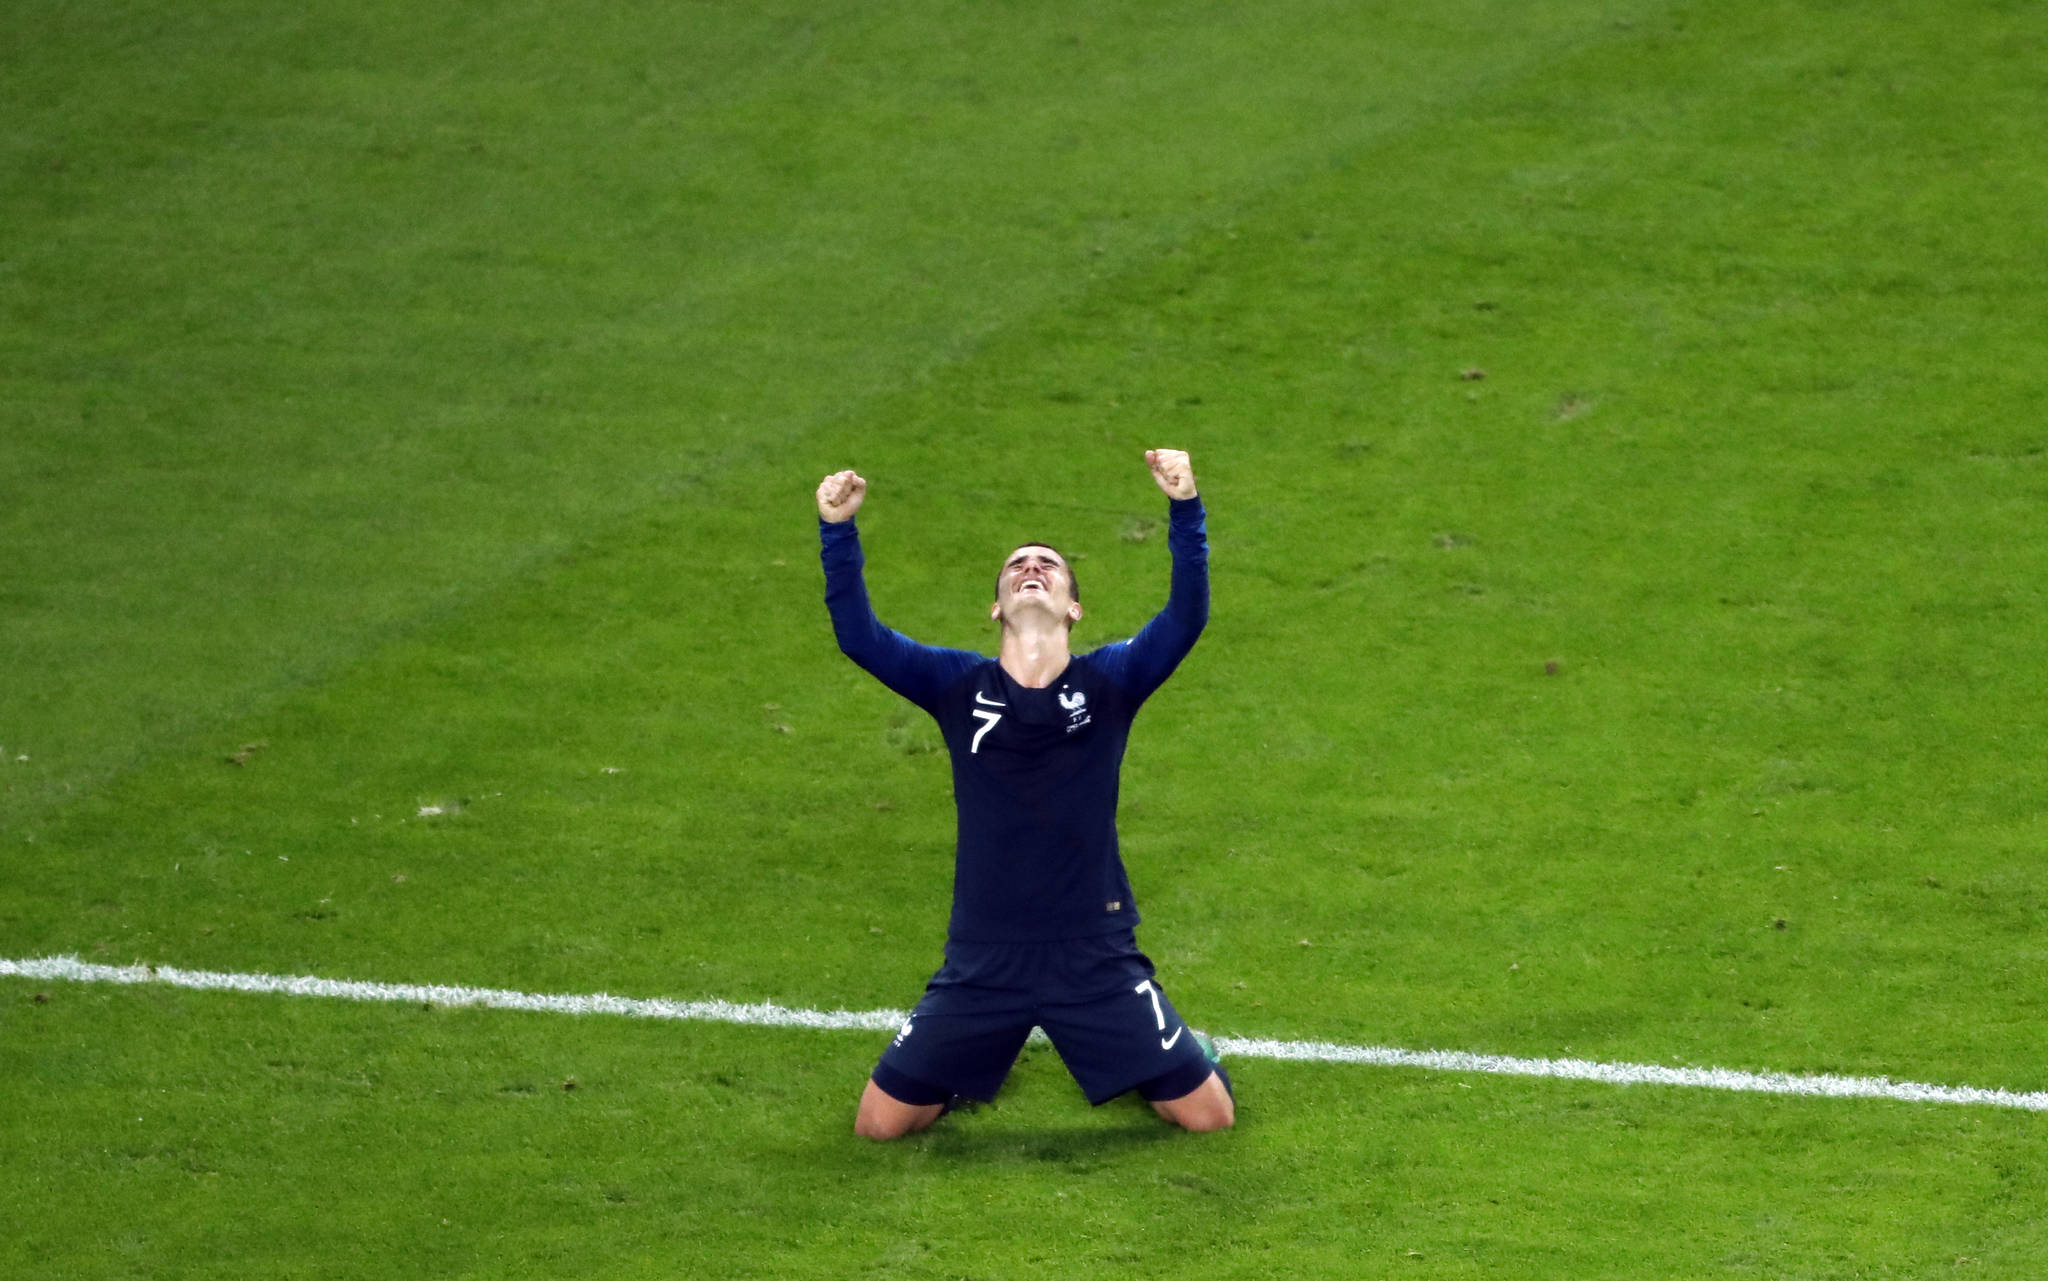 France’s Antoine Griezmann celebrates at the end of the semifinal match between France and Belgium at the 2018 soccer World Cup in the St. Petersburg Stadium in St. Petersburg, Russia, Tuesday, July 10, 2018. (AP Photo/Pavel Golovkin)